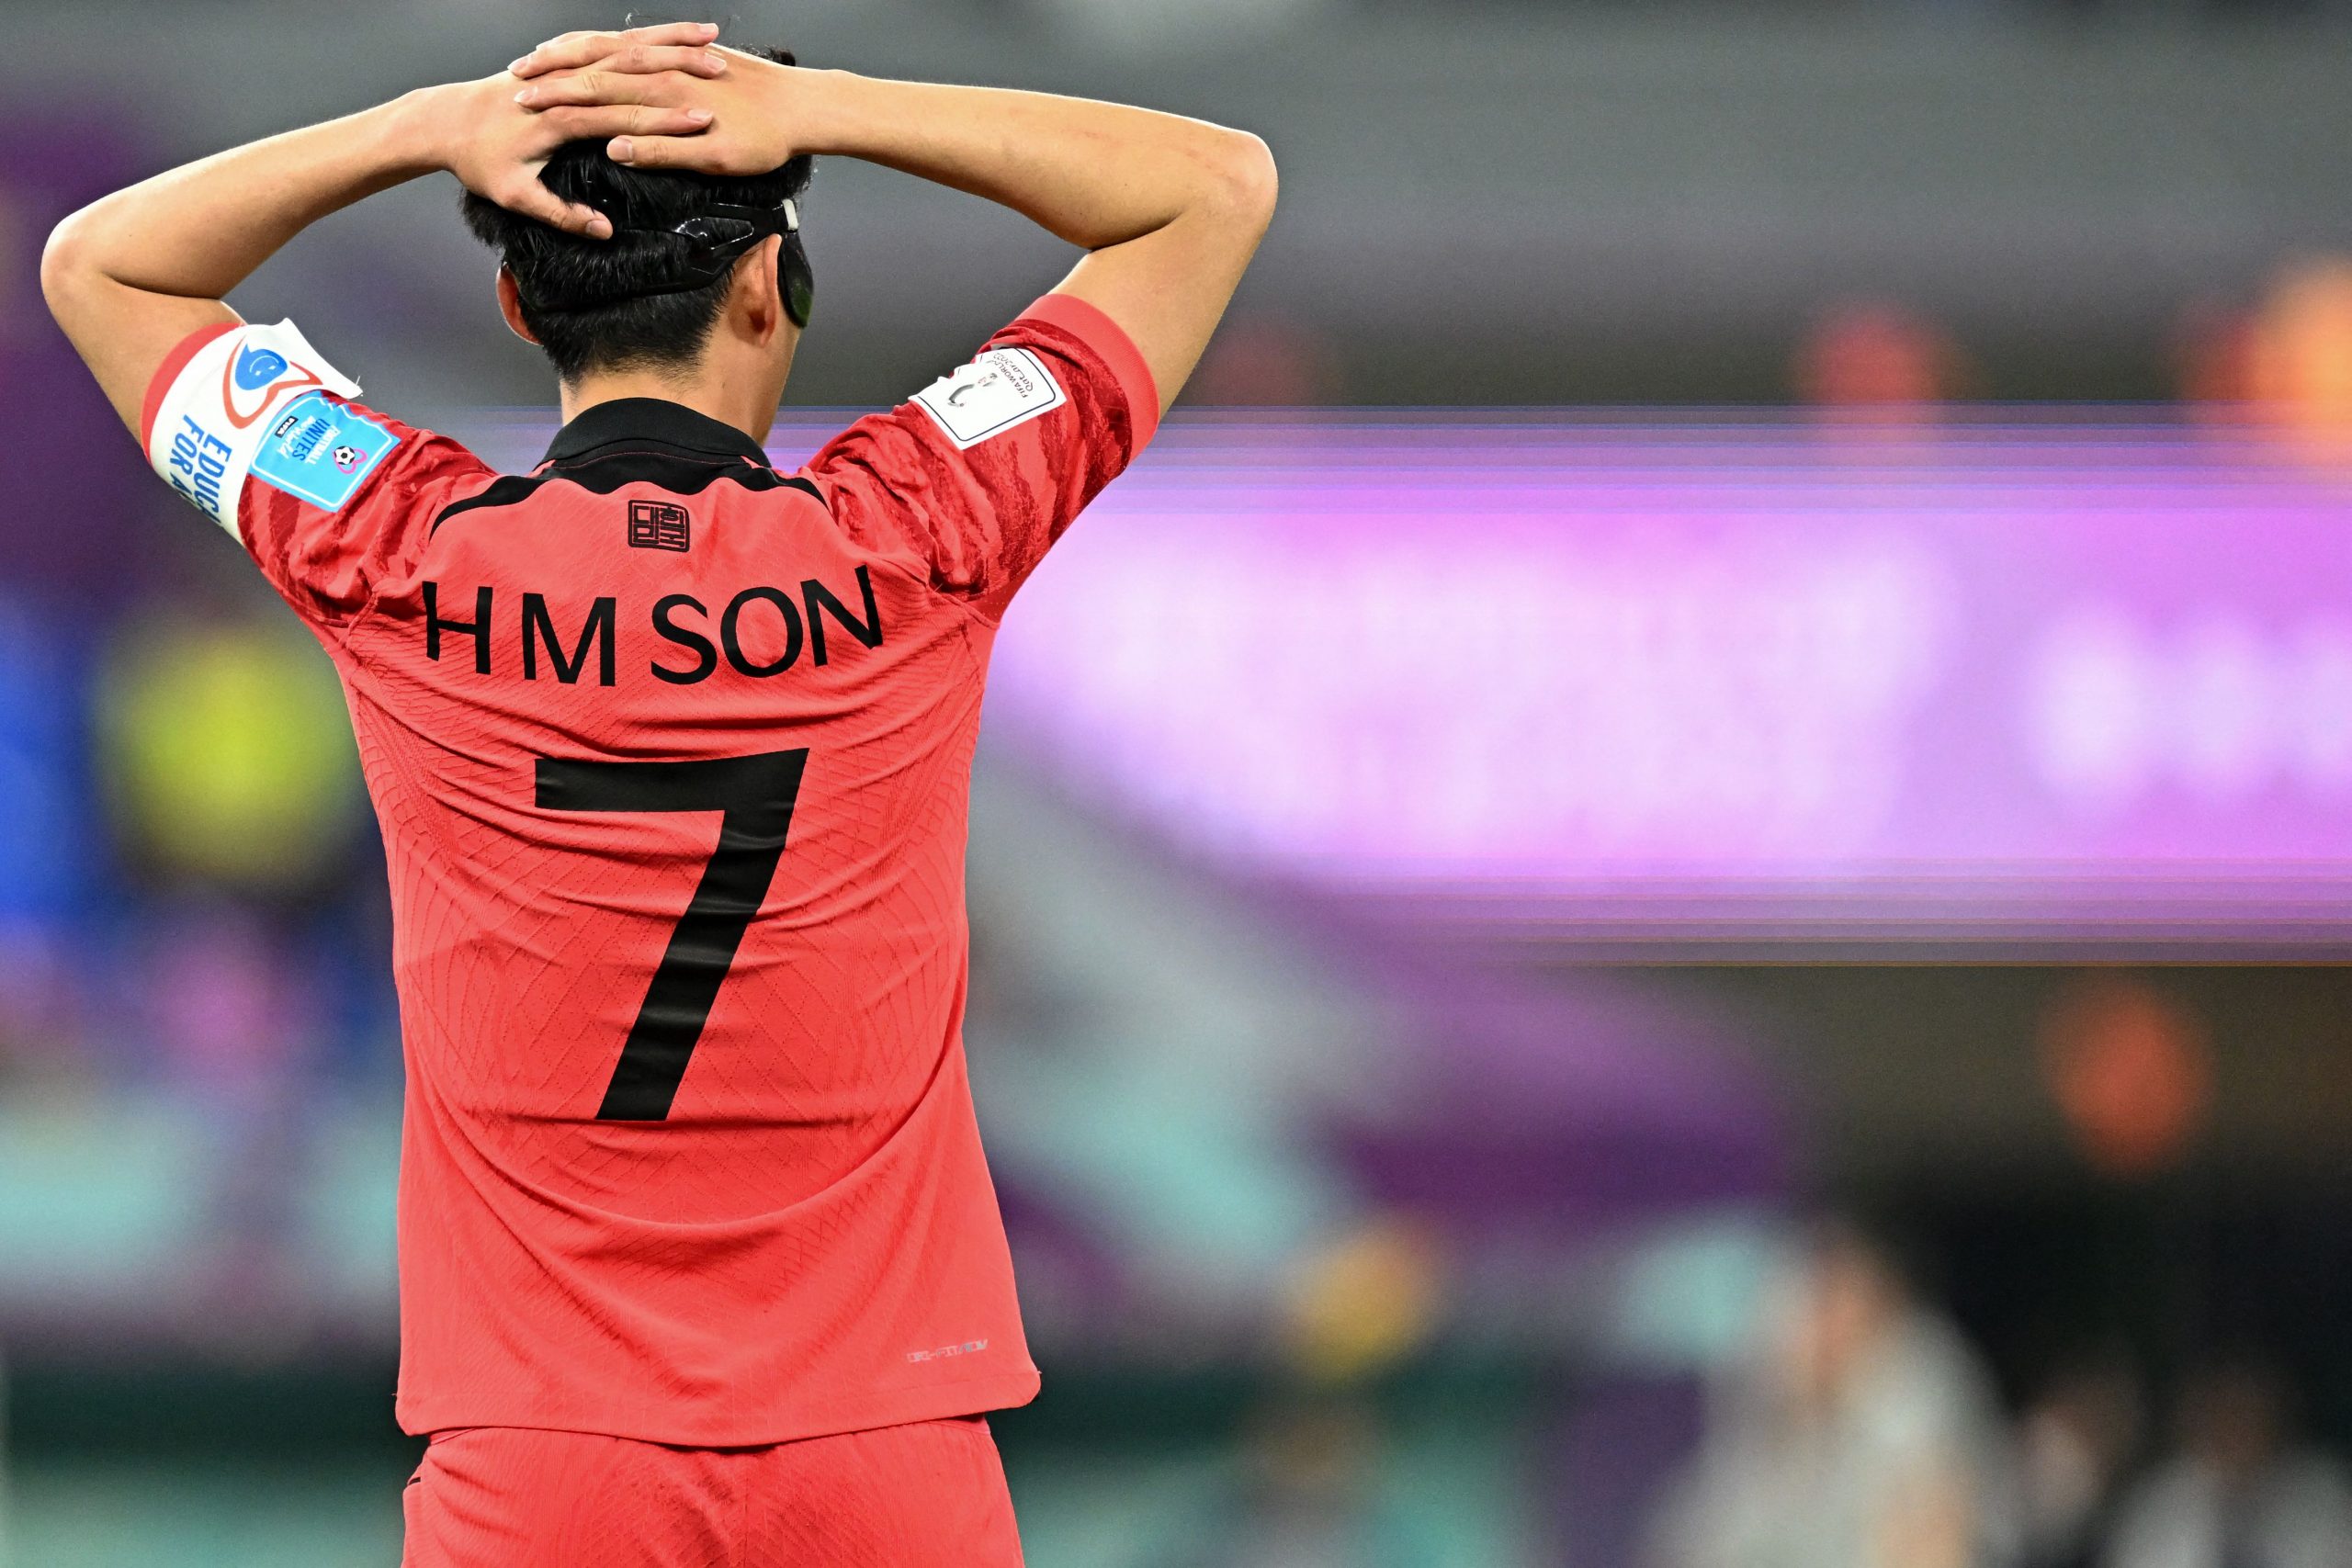 South Korea's midfielder #07 Son Heung-min reacts to a missed chance during the Qatar 2022 World Cup round of 16 football match between Brazil and South Korea at Stadium 974 in Doha on December 5, 2022. (Photo by MANAN VATSYAYANA / AFP) (Photo by MANAN VATSYAYANA/AFP via Getty Images)